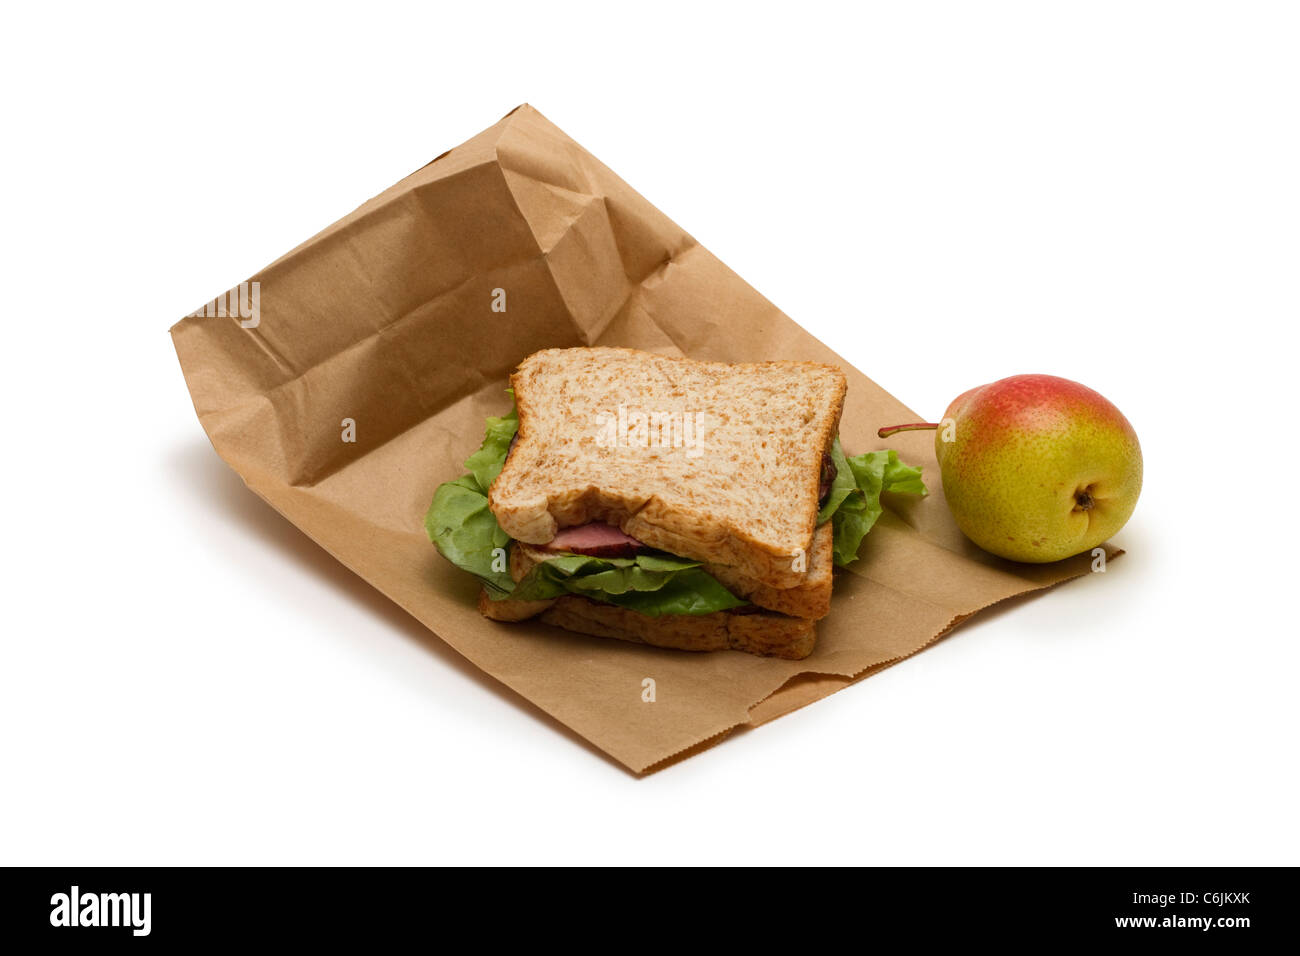 Brown bag lunch with ham sandwich and a pear on a white background Stock Photo